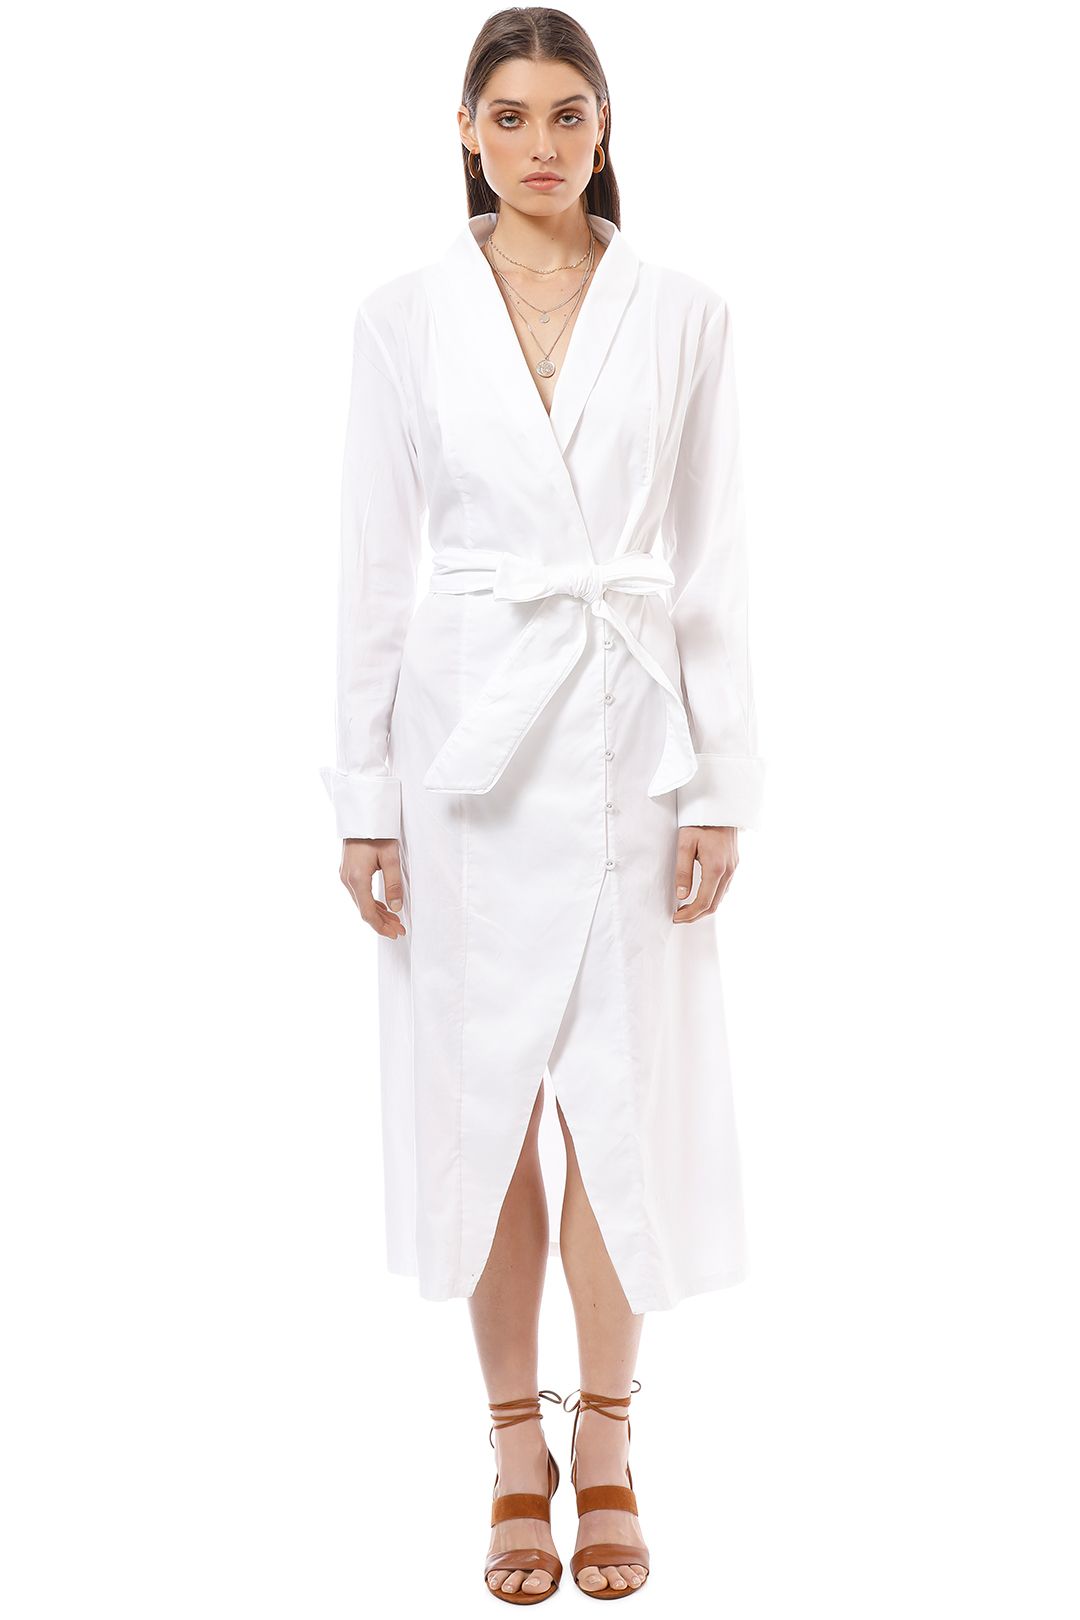 CMEO Collective - Your Type Shirt Dress - White - Front